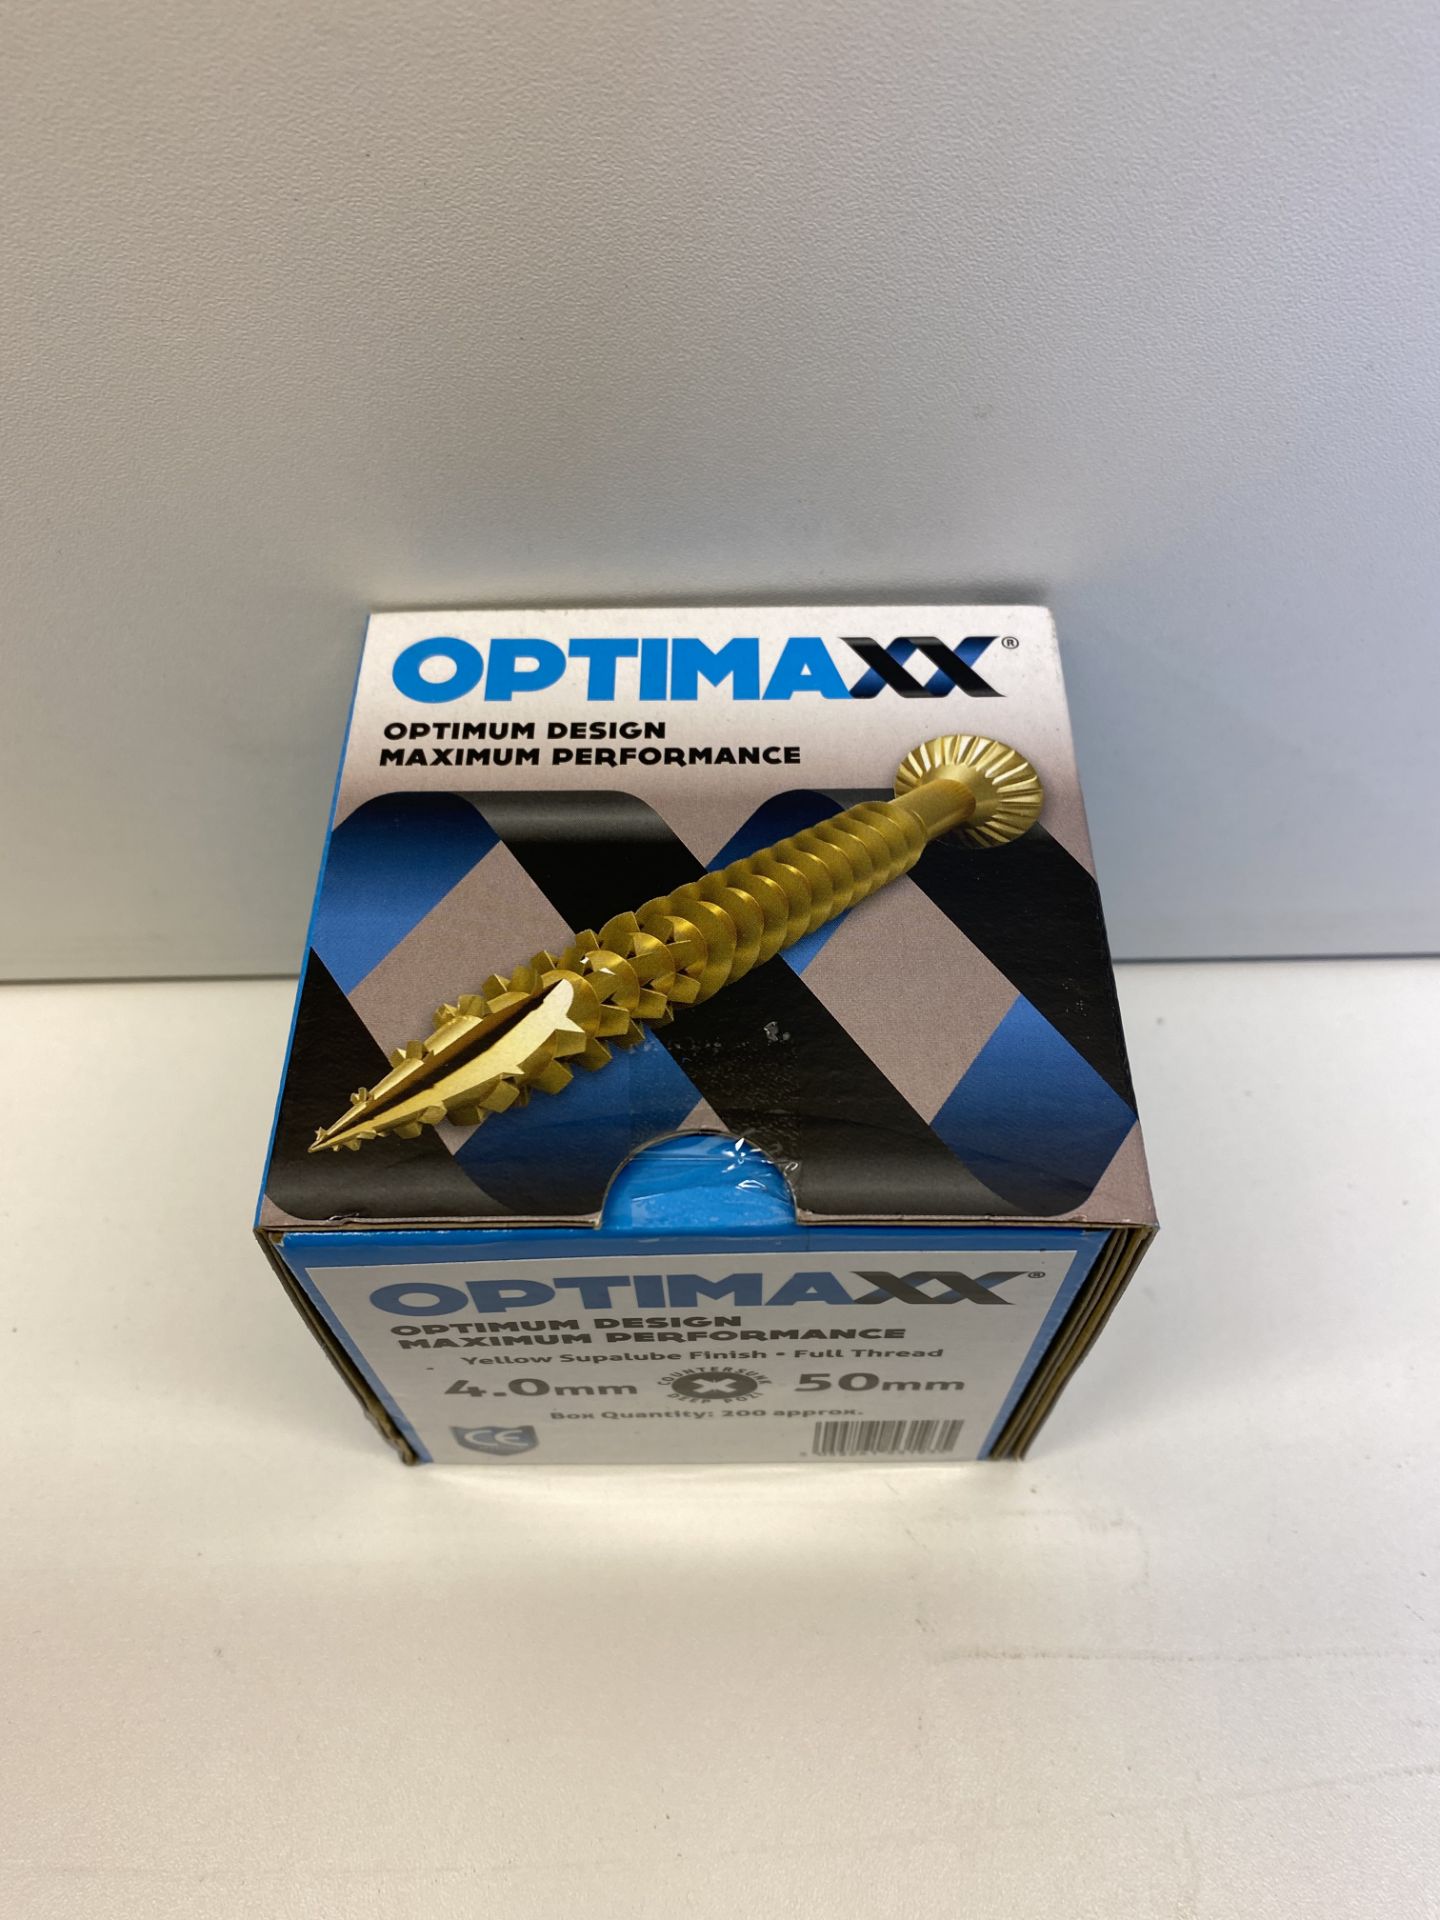 Optimaxx Wood Screw Selection in Case + Tape Measure - Image 7 of 12